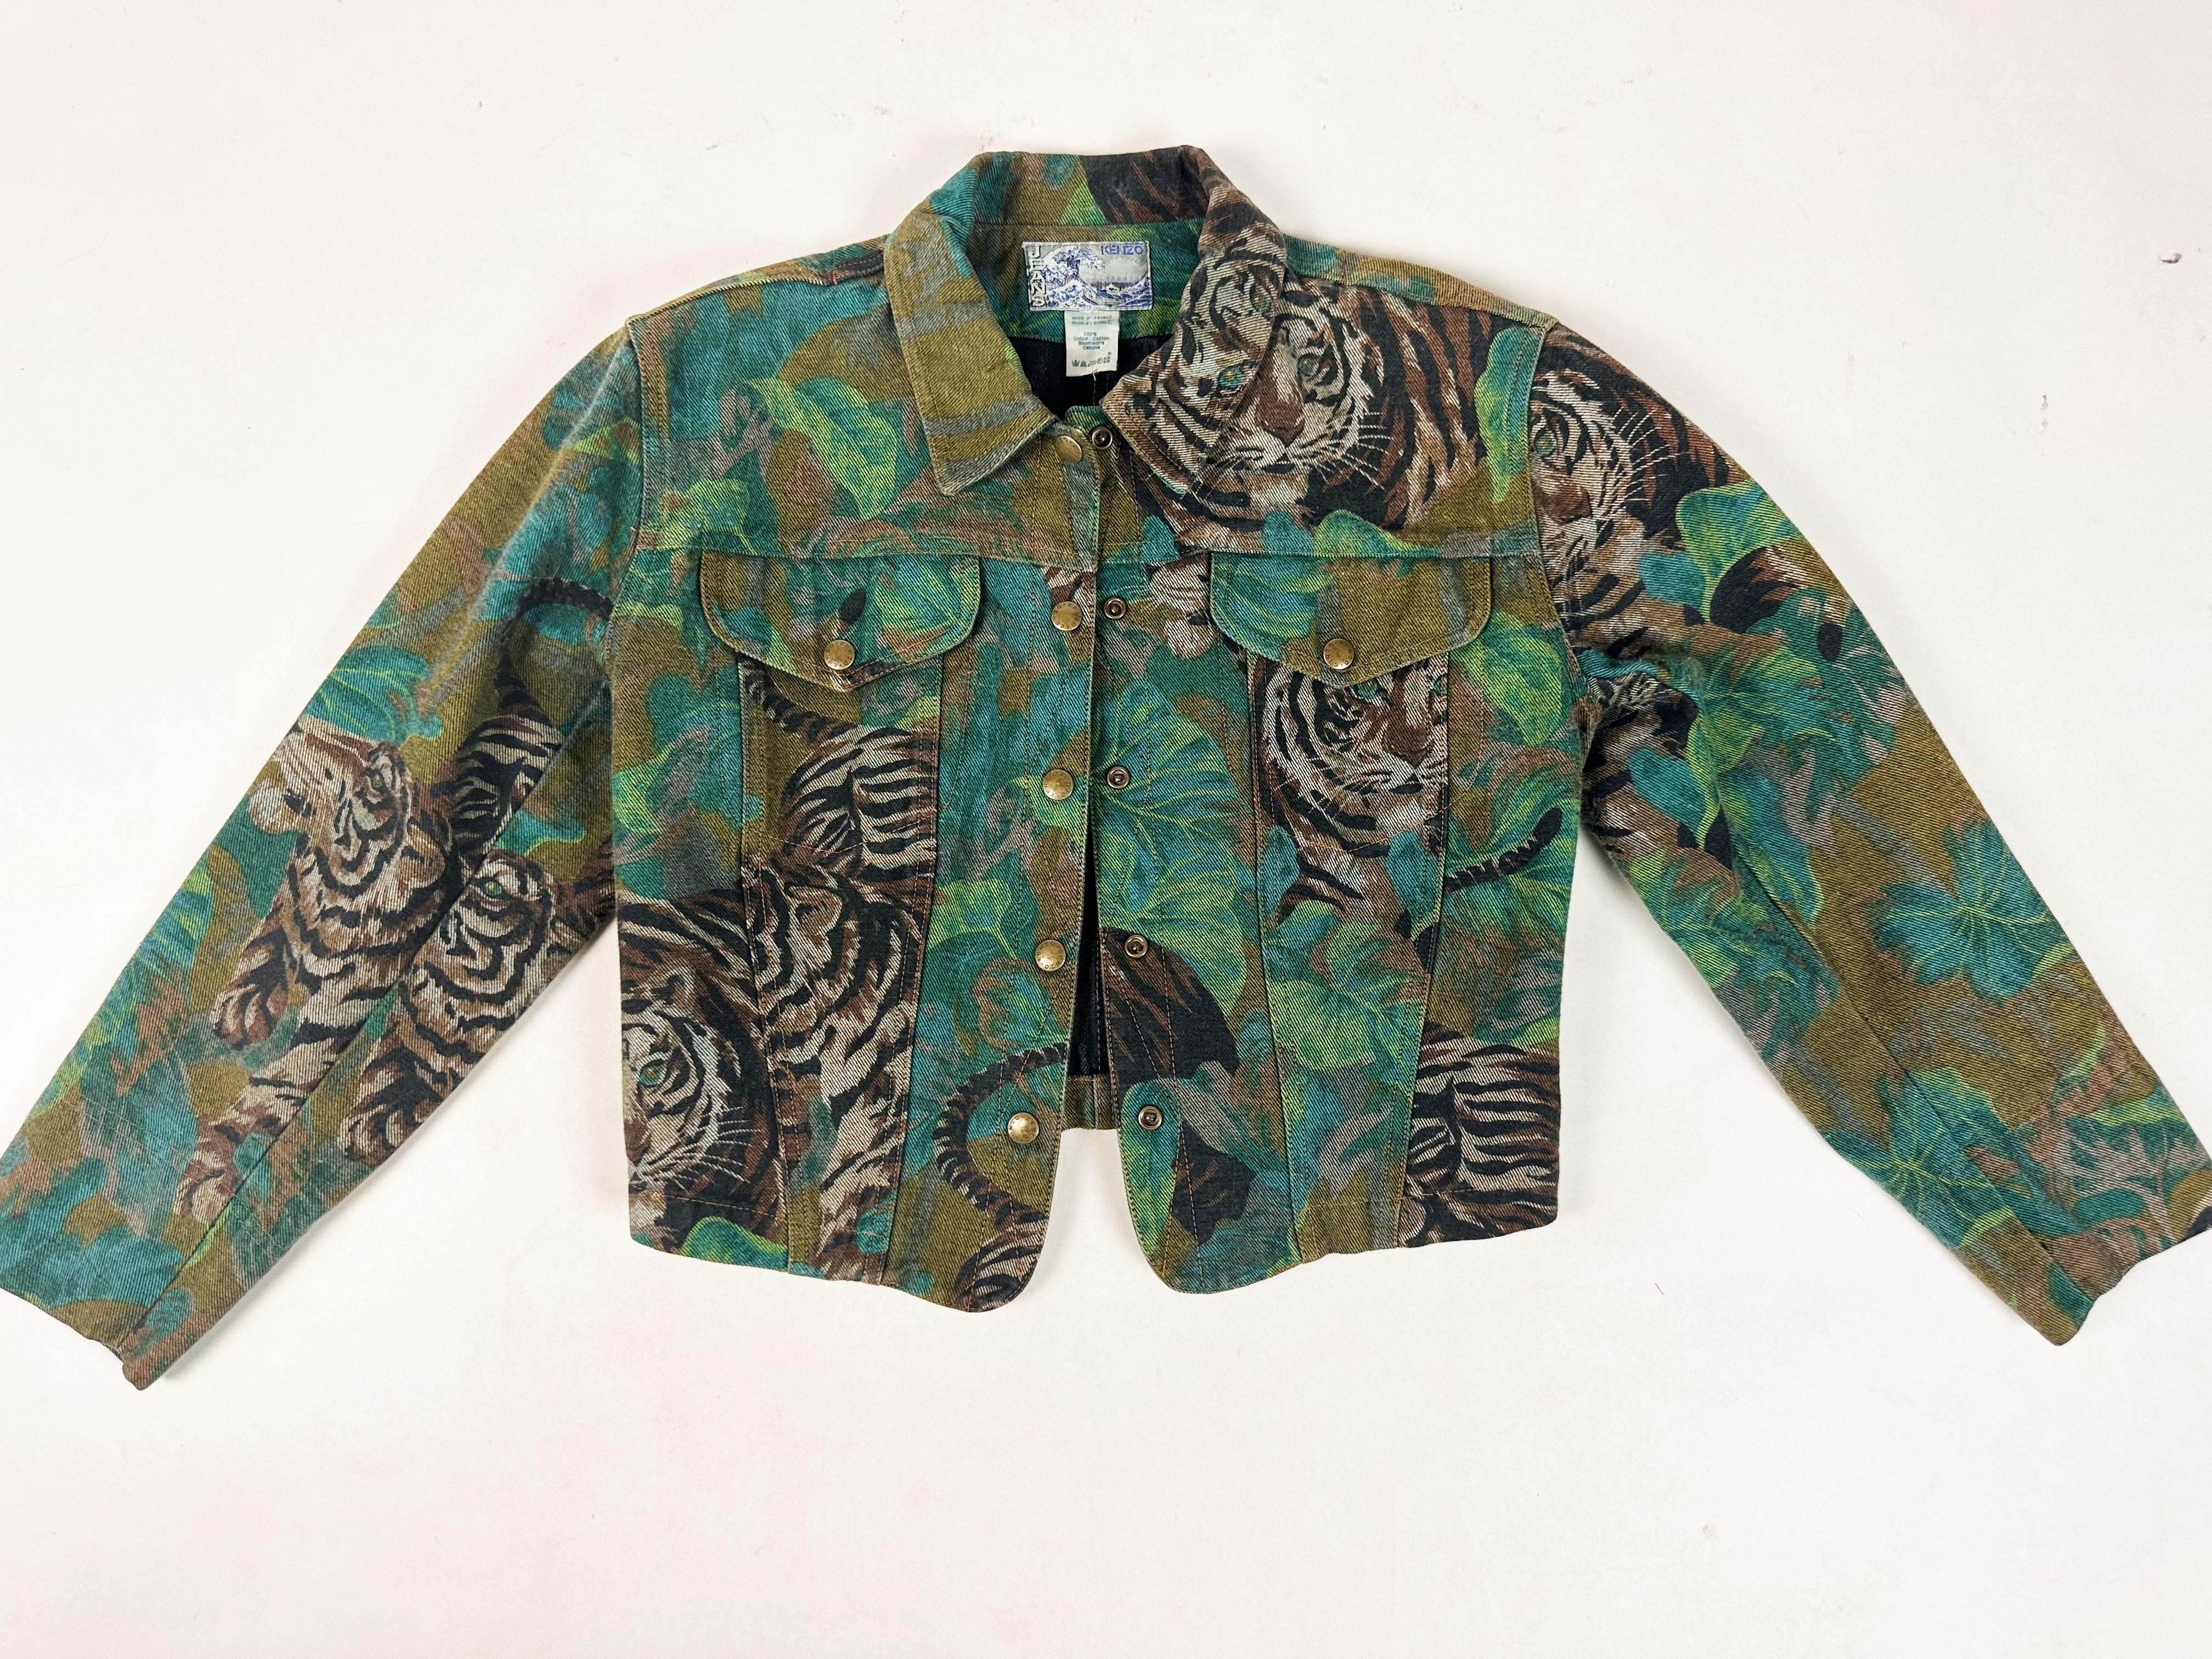 Jacket and Skirt by Kenzo Takada, Jungle & Tiger Print on Denim - French C. 1990 For Sale 13